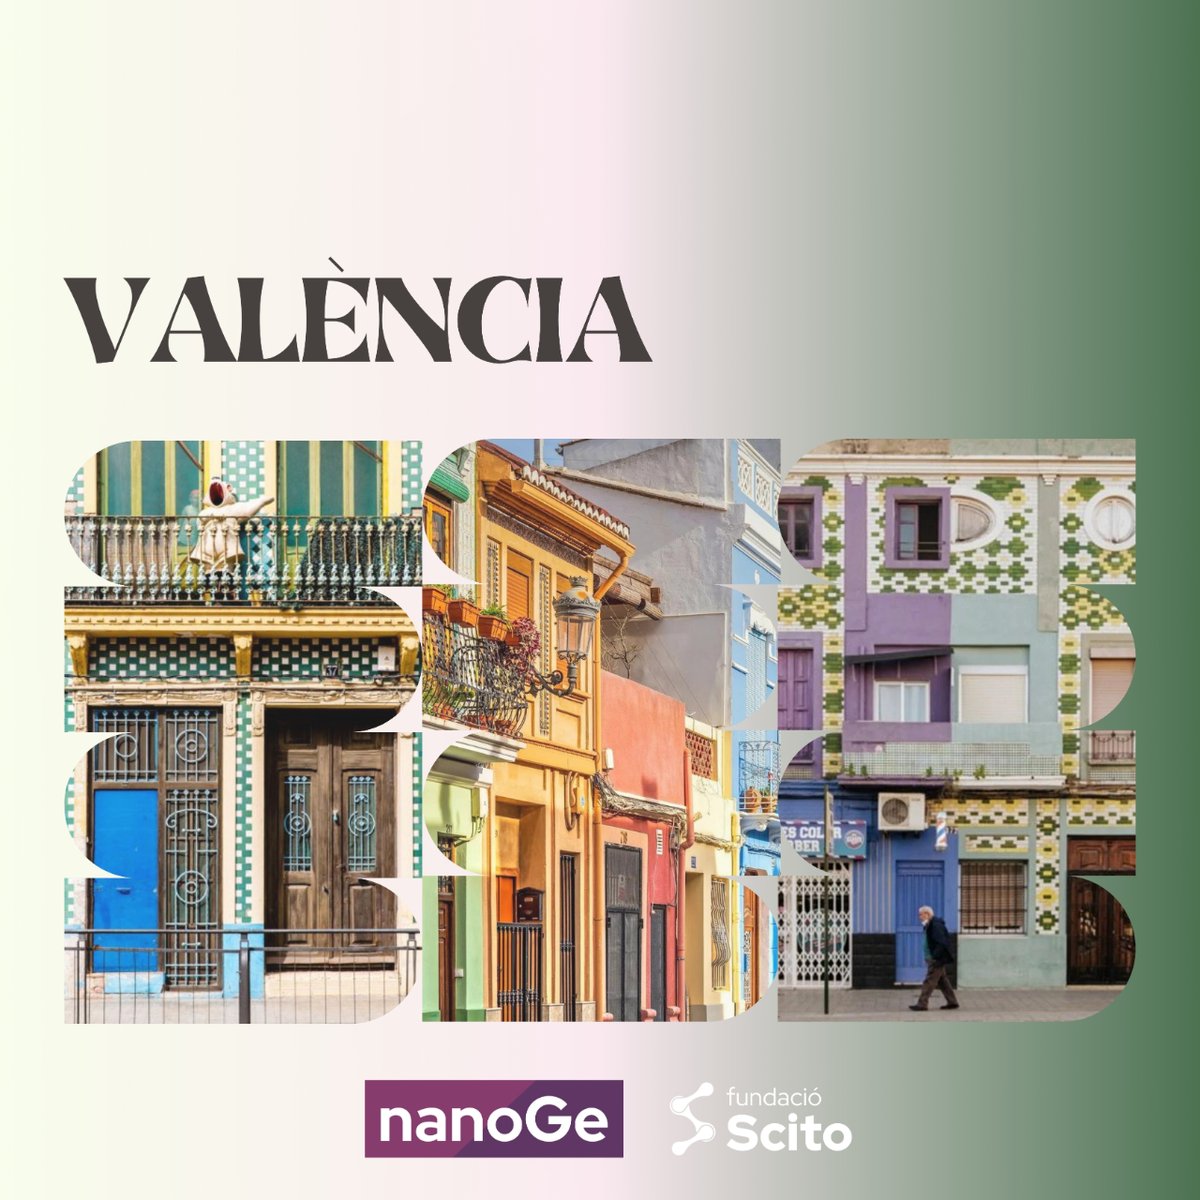 💥Only a few days to start #HOPV24 in València! ☀️Walk along the city streets to discover the history and architecture of Valencian culture and uncover the treasures of its late XIX century tiled facades unique in Europe. 🏠Find most of them in the Cabanyal neighbourhood!